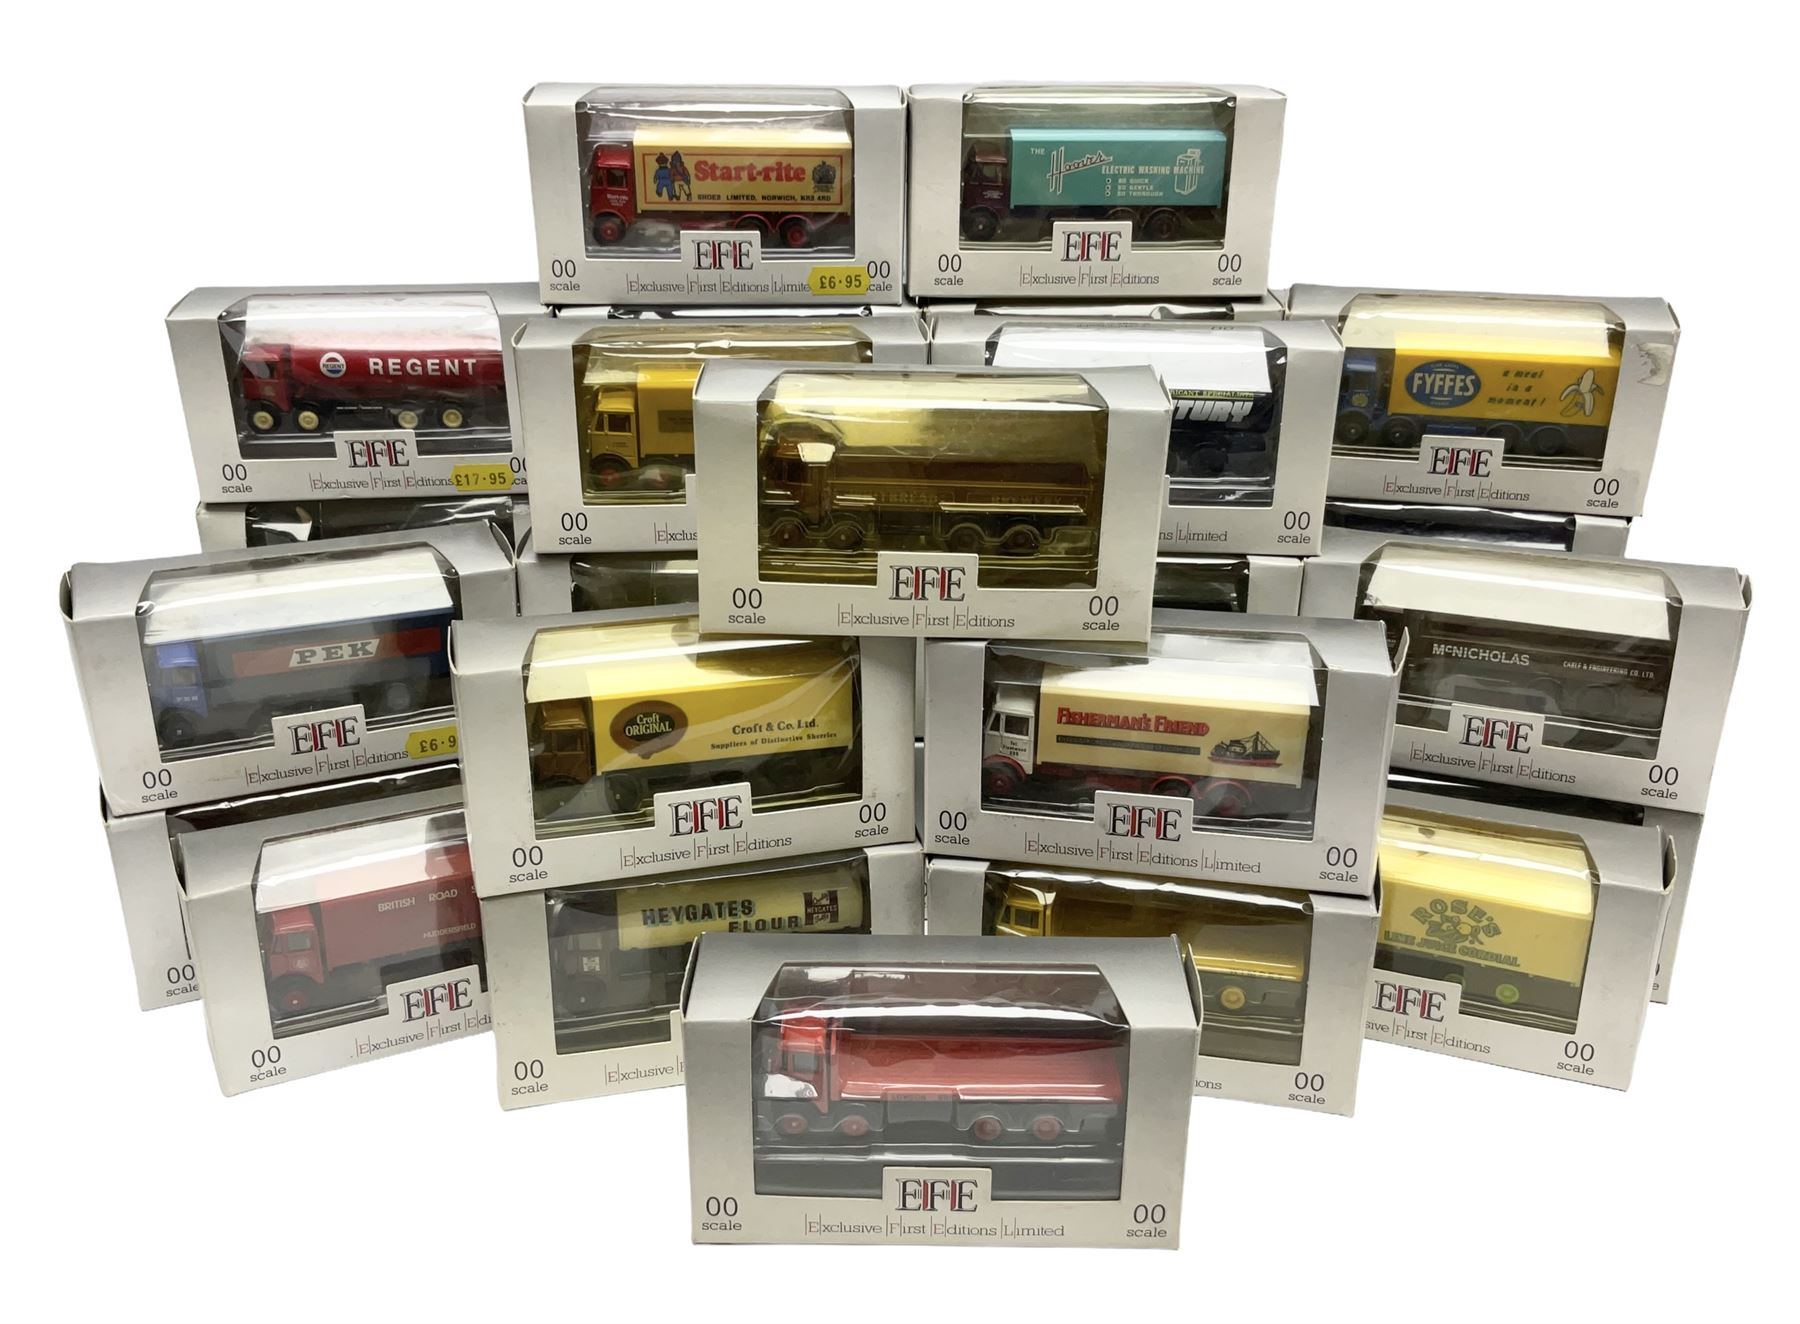 Thirty-two Exclusive First Editions Commercials '00' scale die-cast models